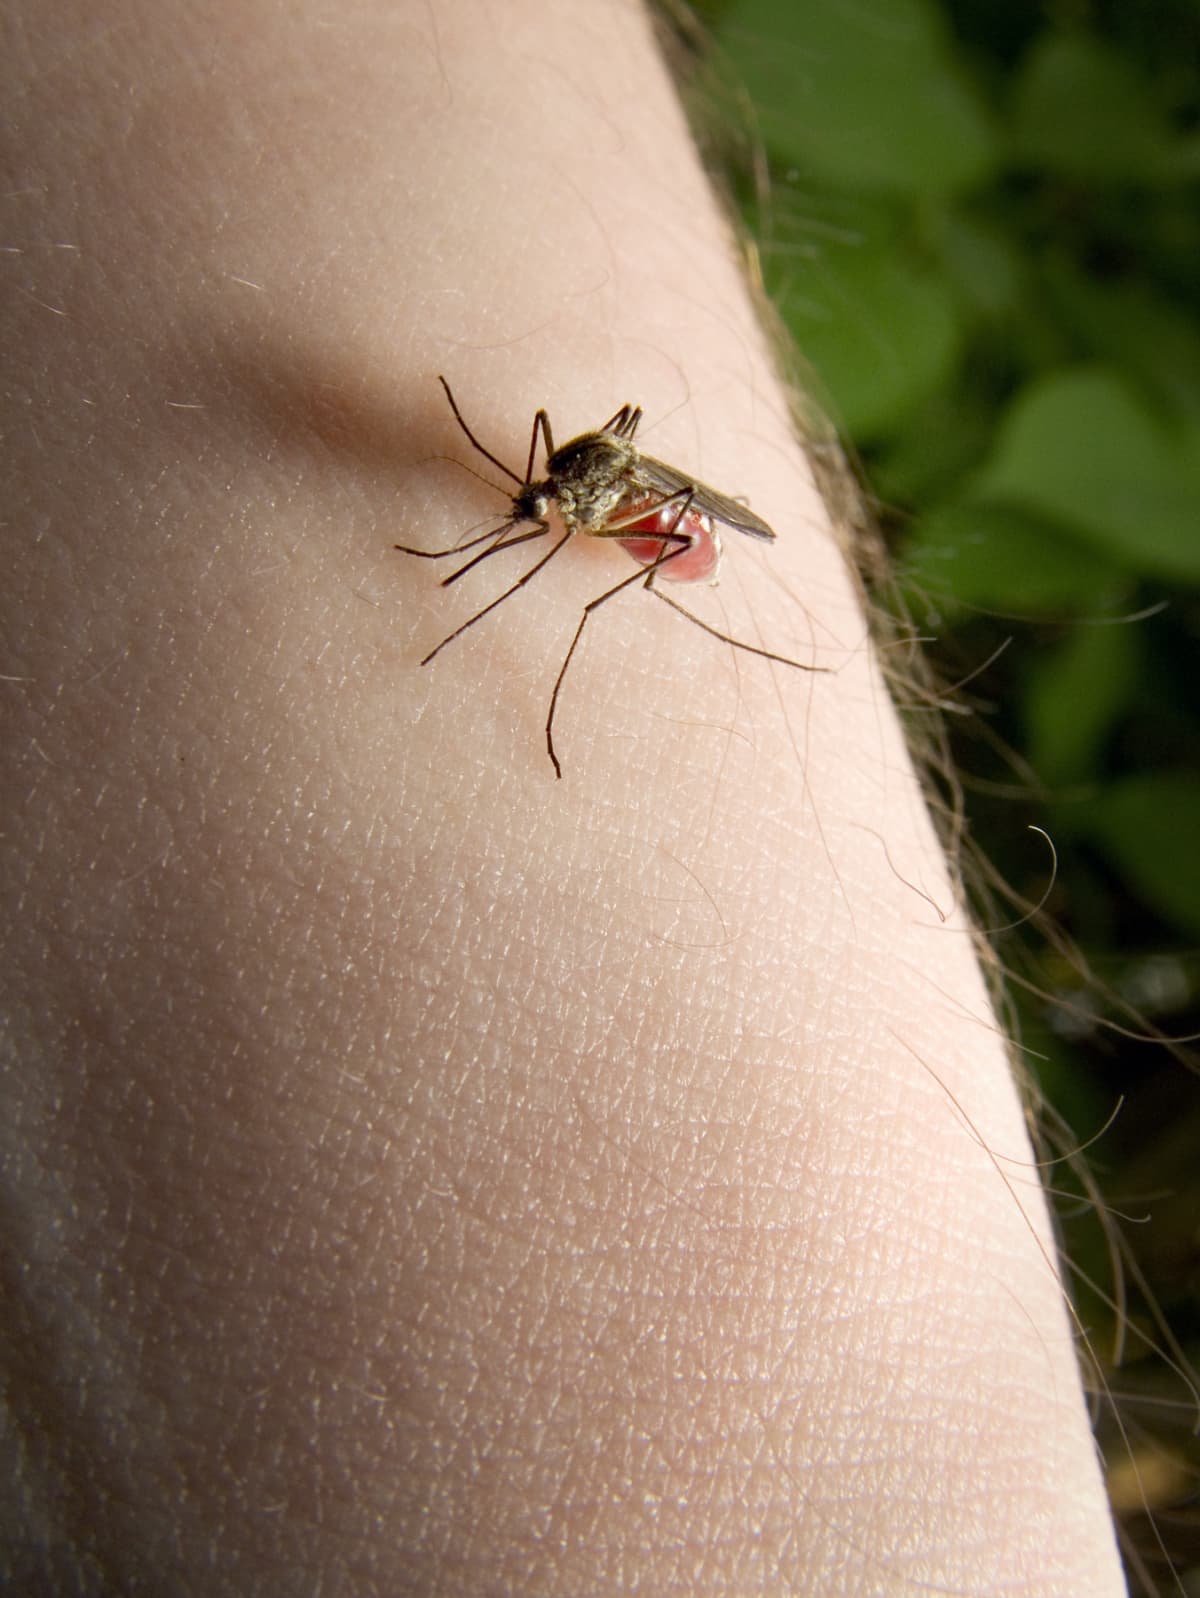 Mosquito on the skin sucking blood